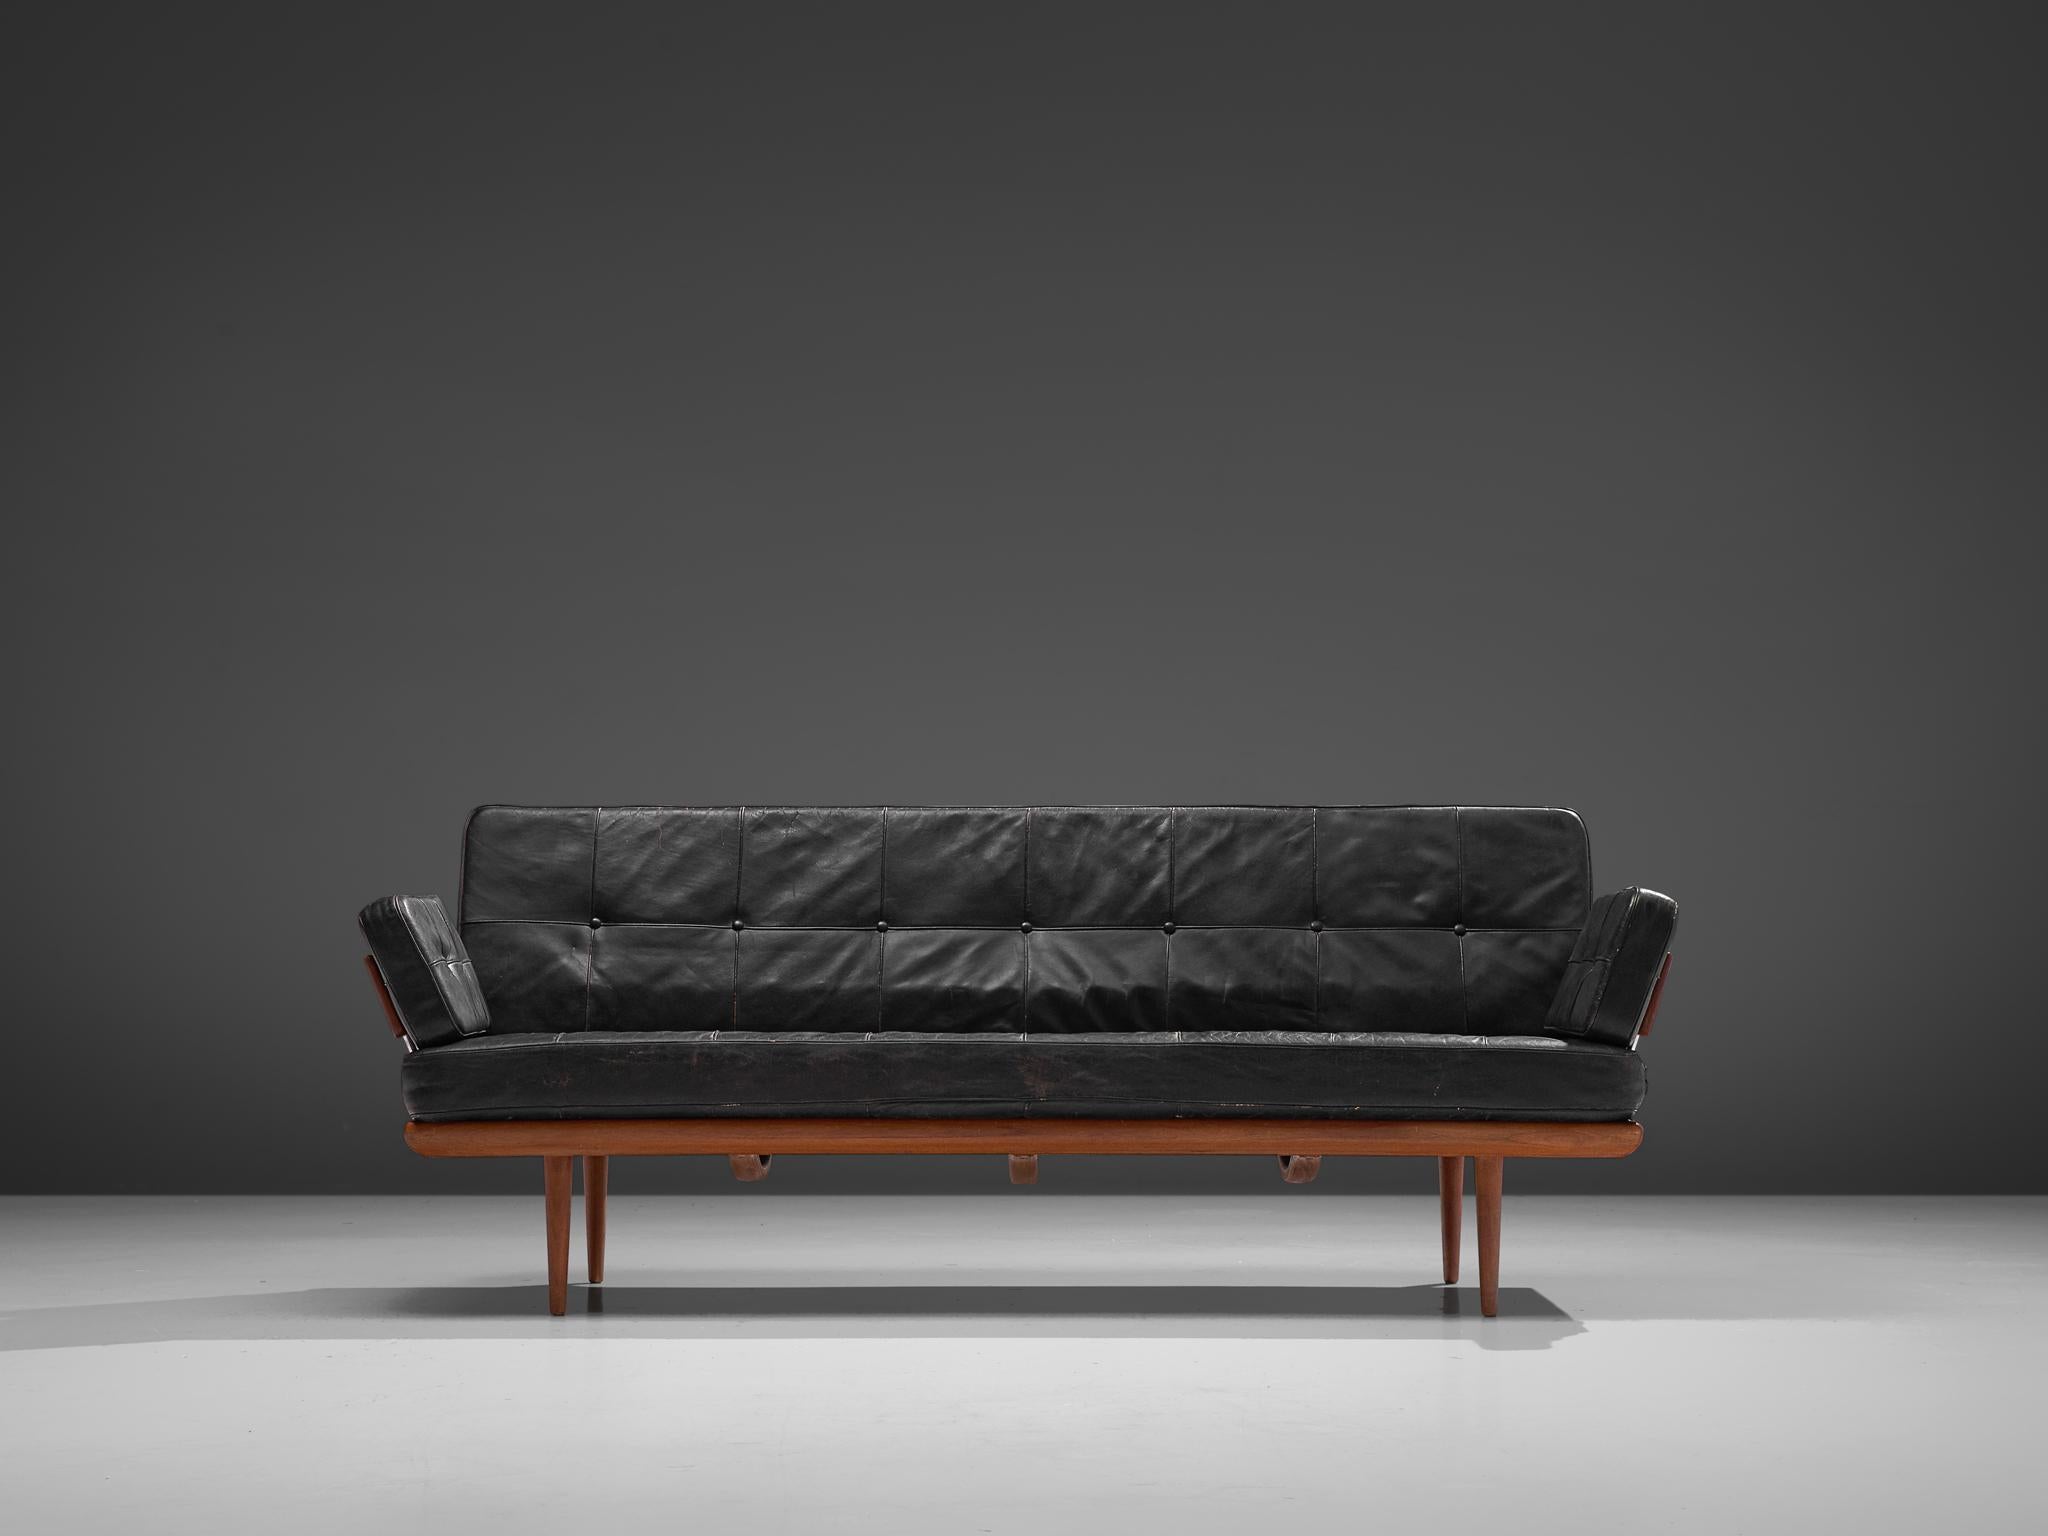 Peter Hvidt and Orla Mølgaard-Nielsen for France & Søn, 'Minerva' sofa, teak, metal and leather, Denmark, design 1957, production 1960s

This sofa 'Minerva', named after the goddess of wisdom, is a true midcentury Classic by the design duo Peter